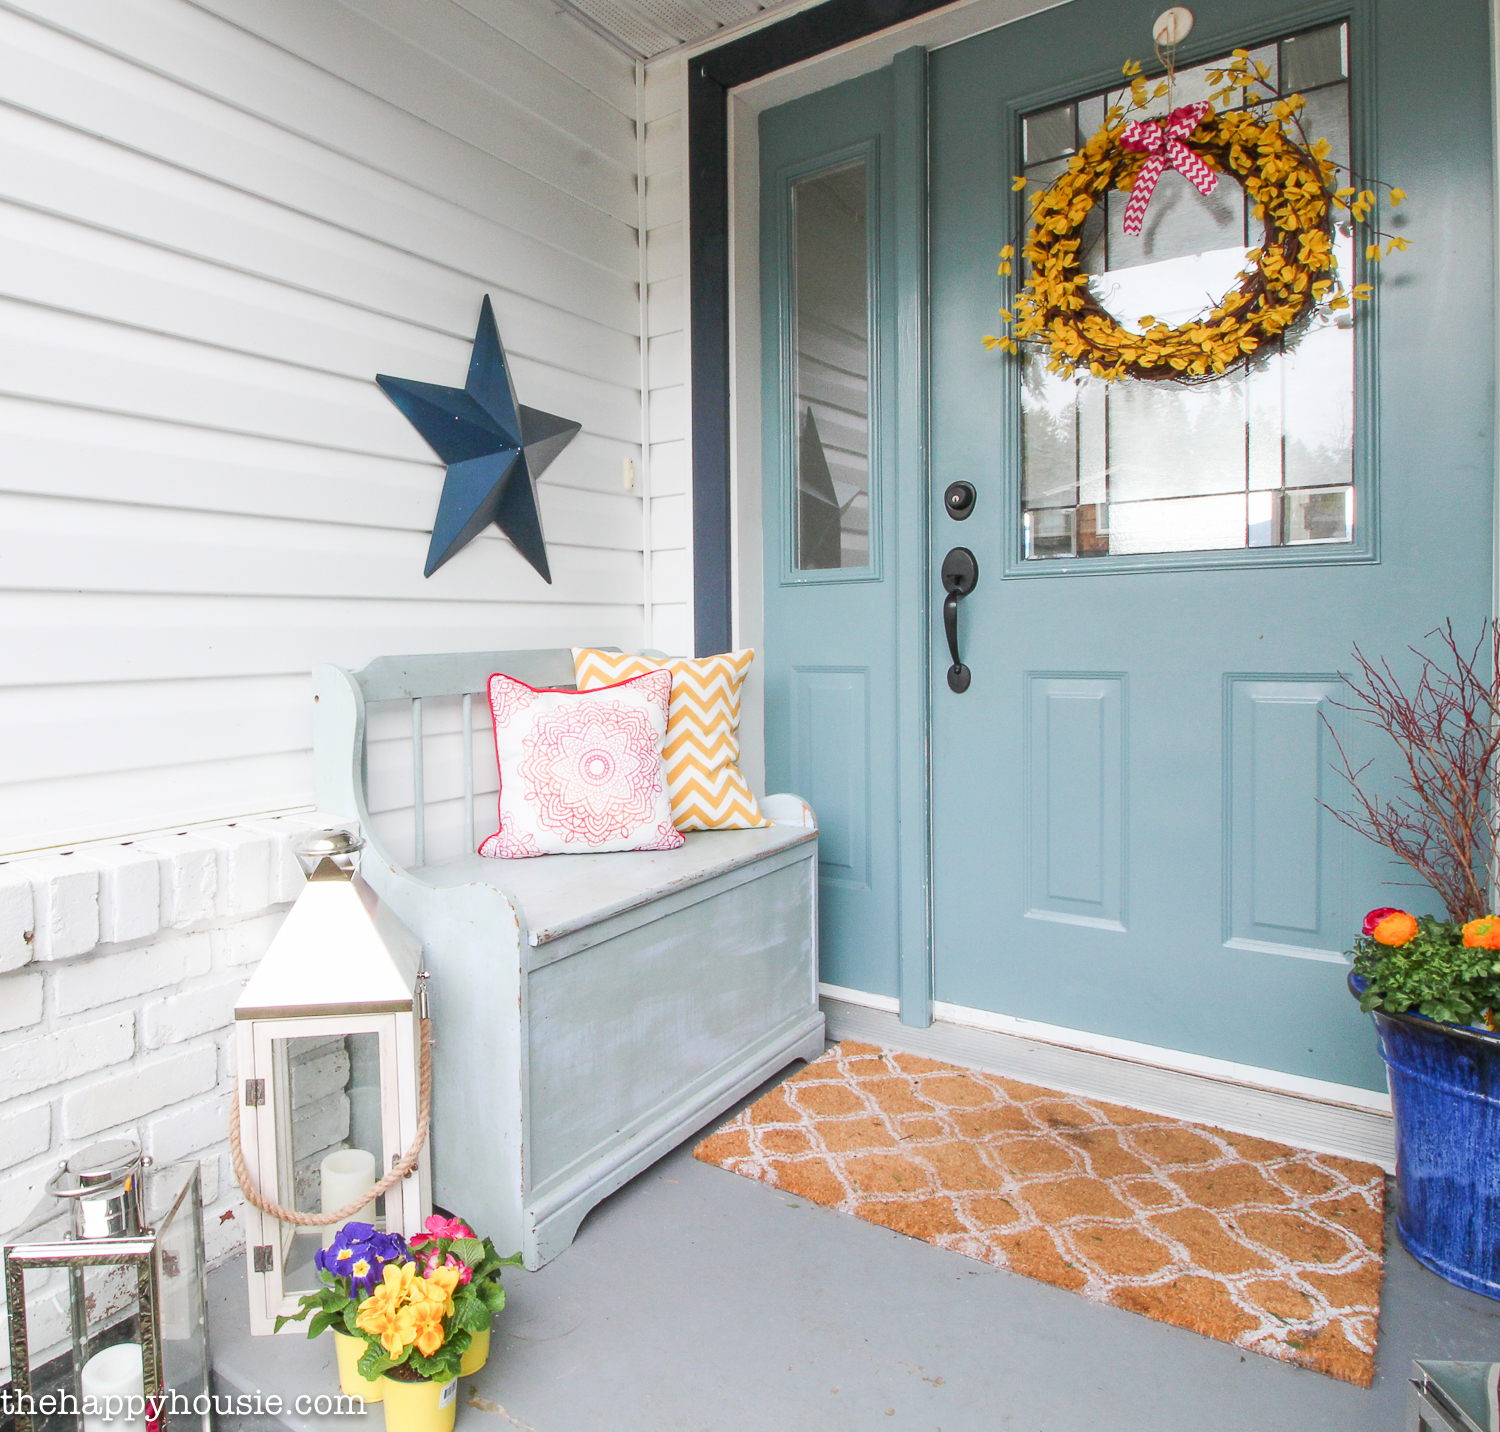 A small grey bench with throw pillows is by the front door.